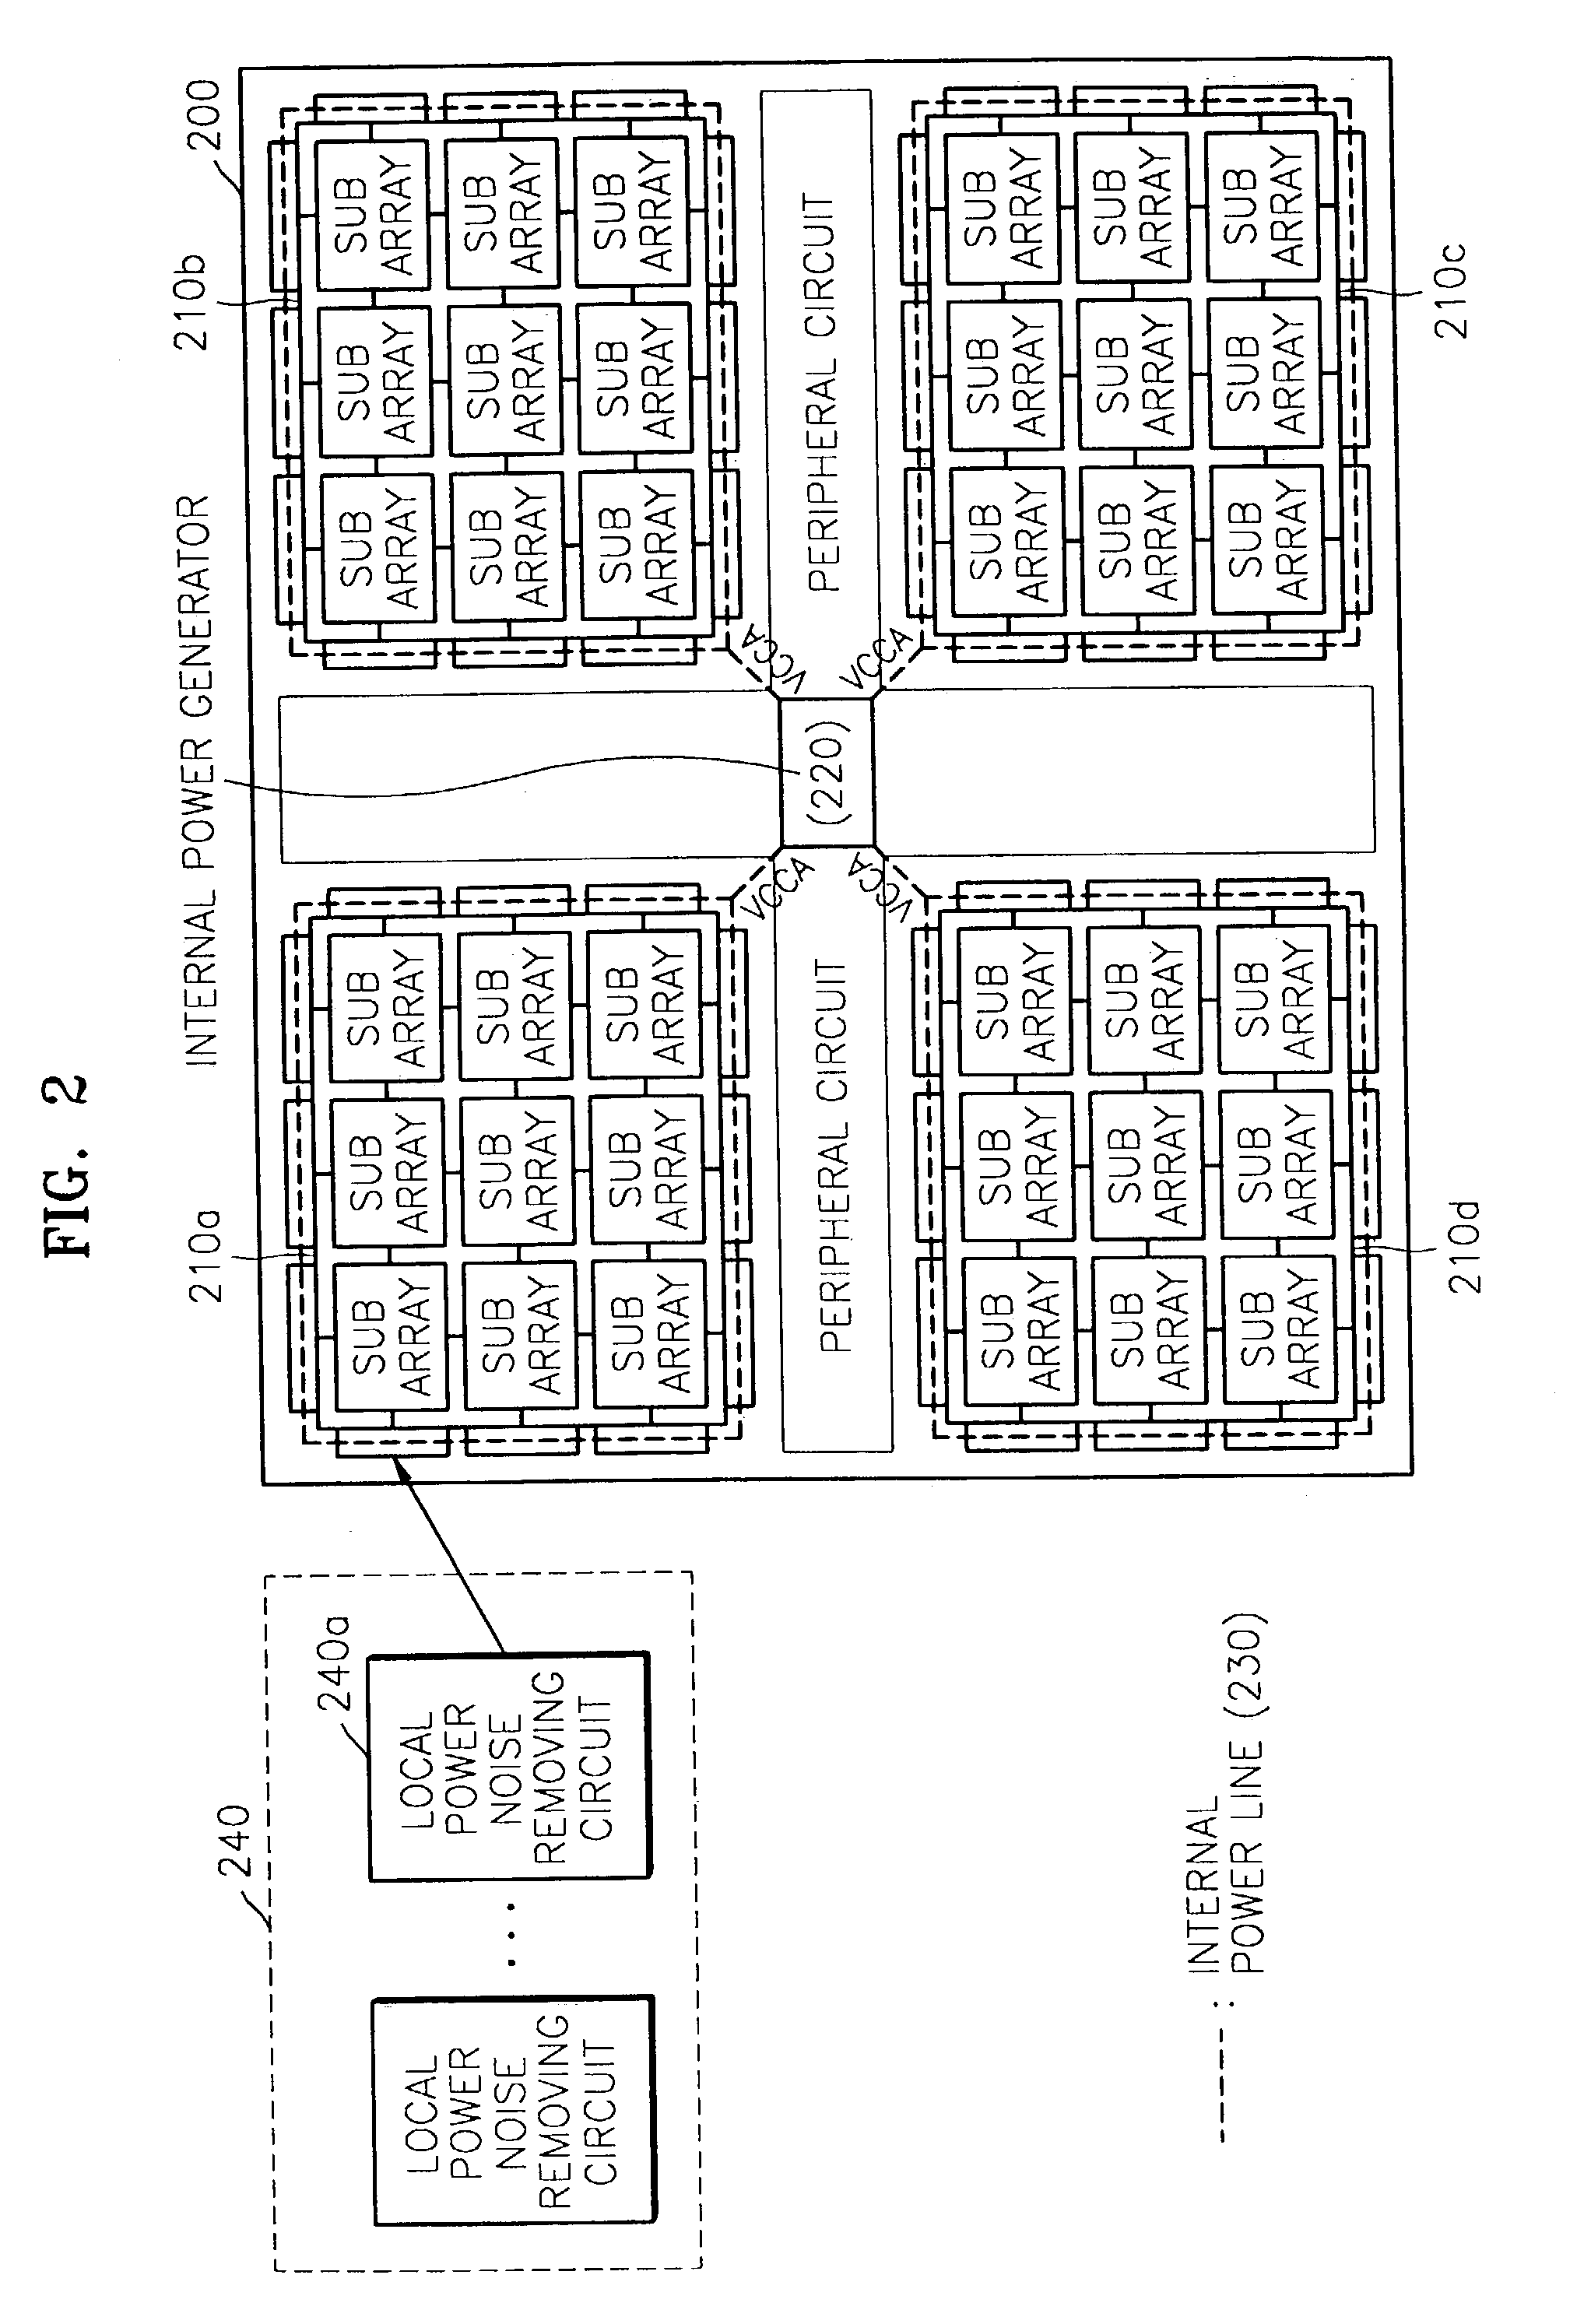 Semiconductor memory device having a circuit for removing noise from a power line of the memory device using a plurality of decoupling capactors